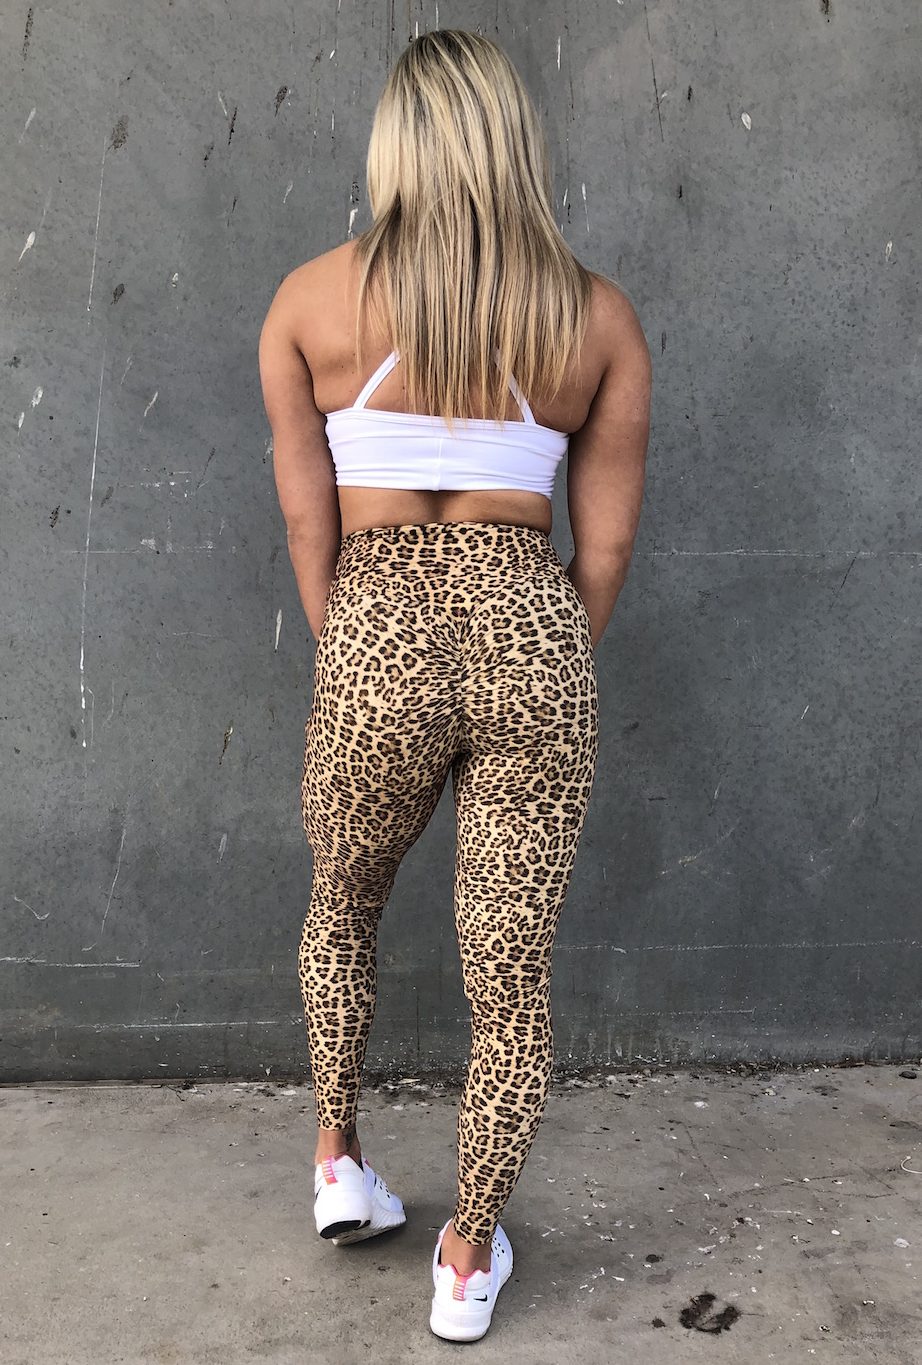 80s Fashion for Women - 27 Best Outfits Inspired by 1980 | Fashion, Cheetah  print leggings, Leopard print leggings outfit